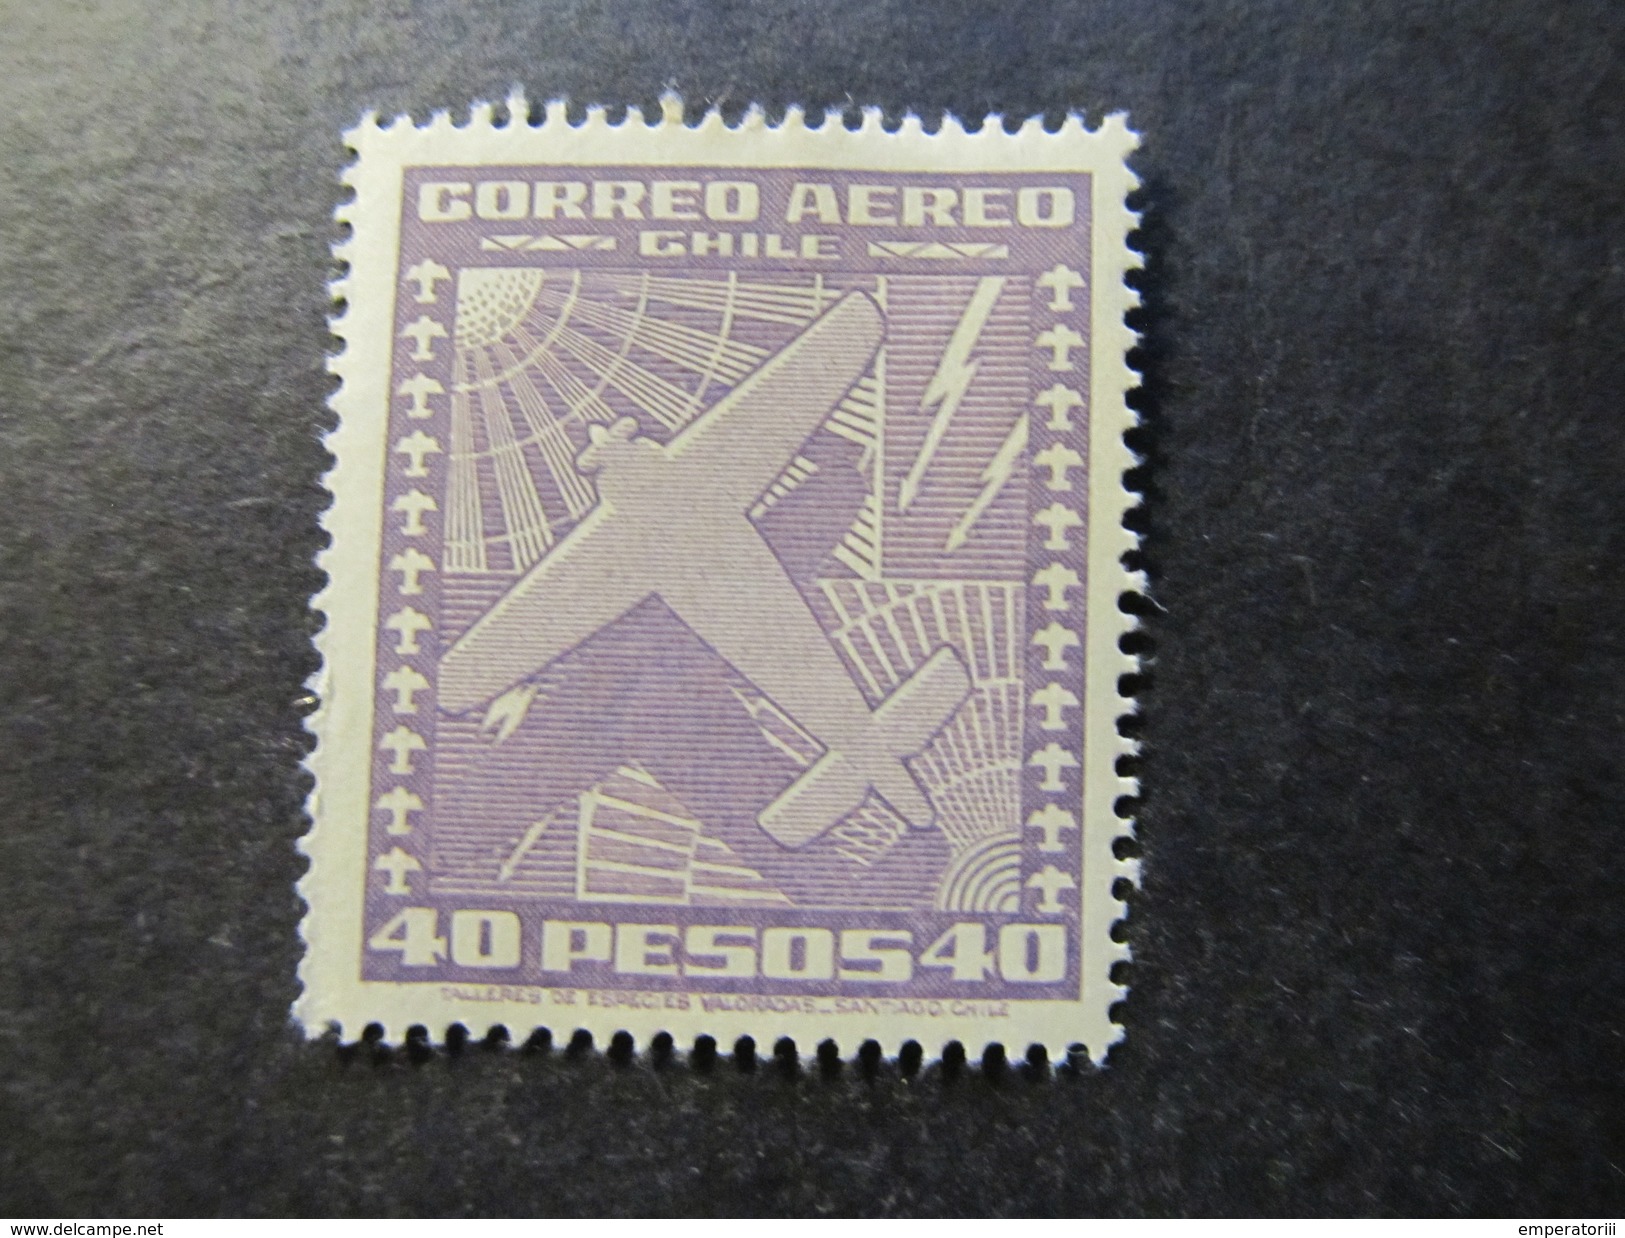 1934/39 - CHILE - AIRPLANE AND SYMBOLS OF SPACE - SCOTT C49 AP9 40P - Cile